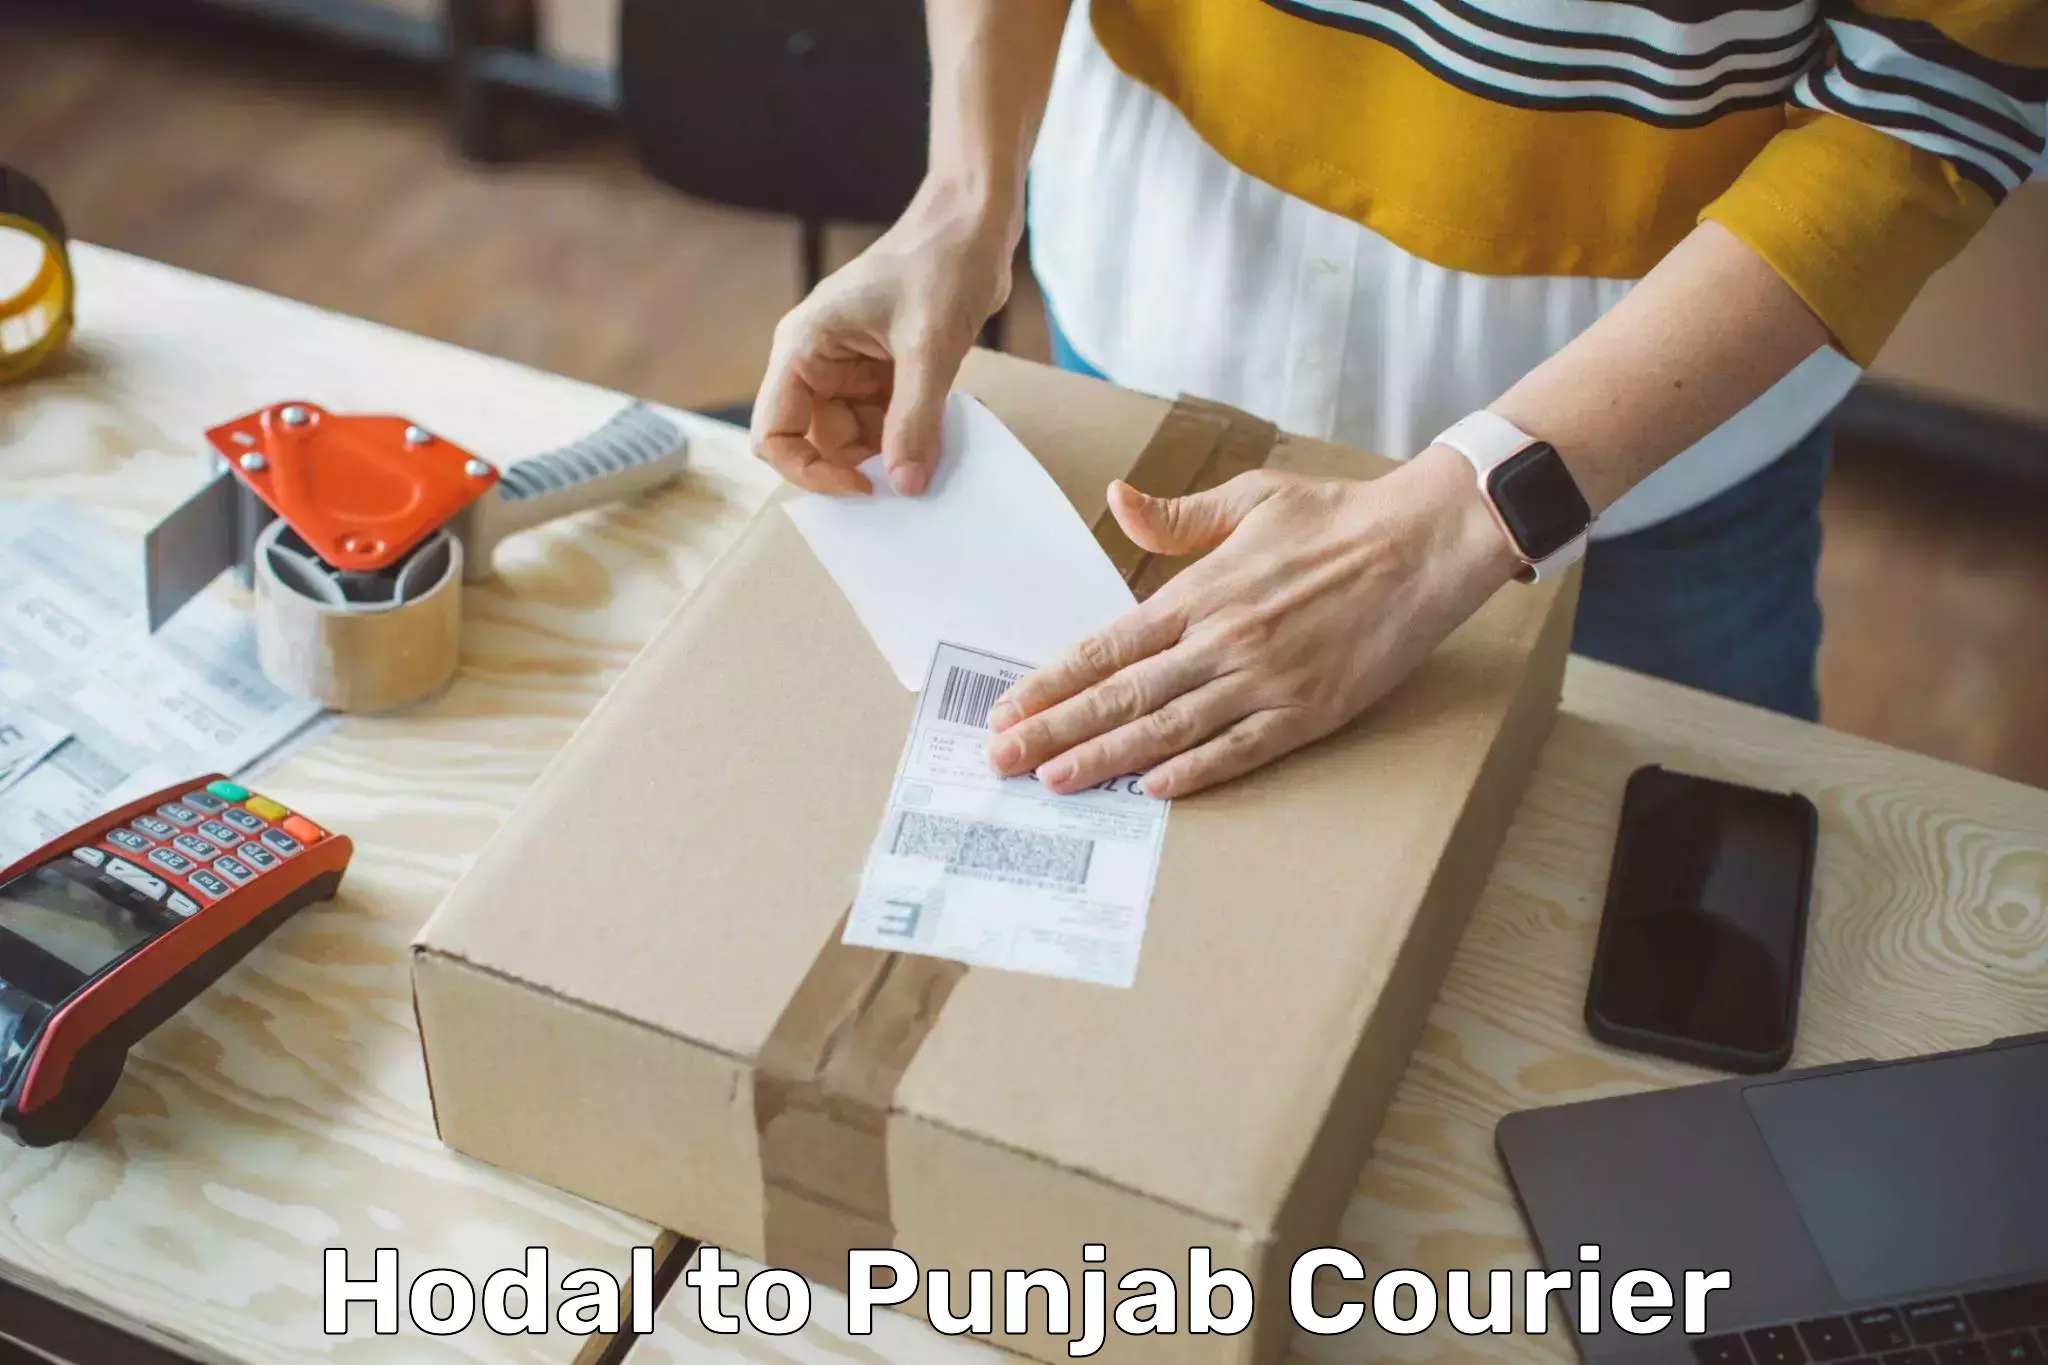 Dynamic courier services Hodal to Punjab